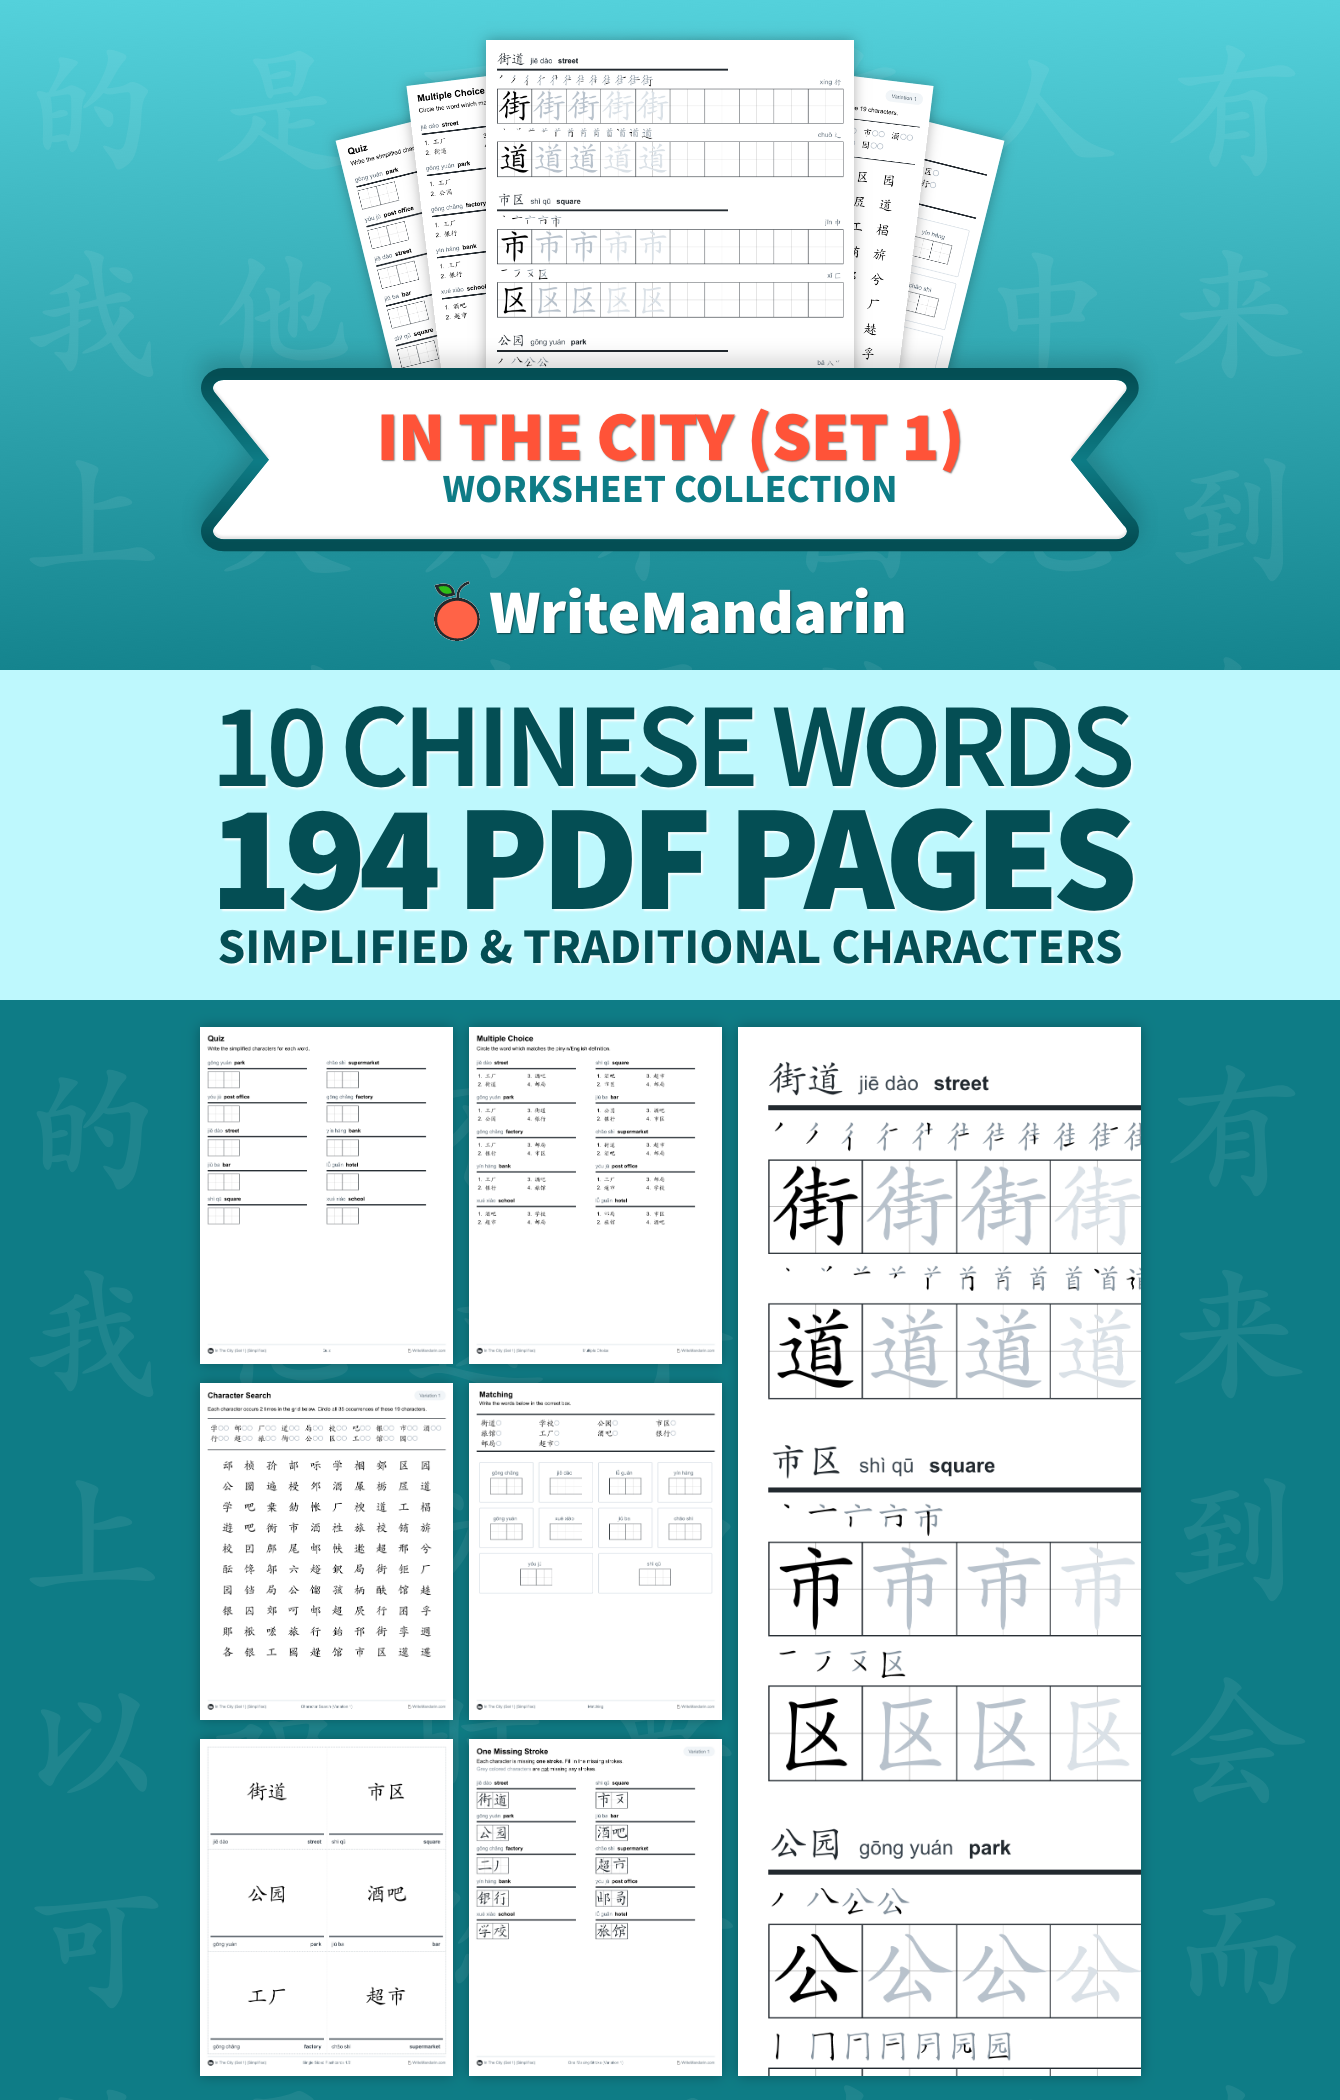 Preview image of In The City (Set 1) worksheet collection